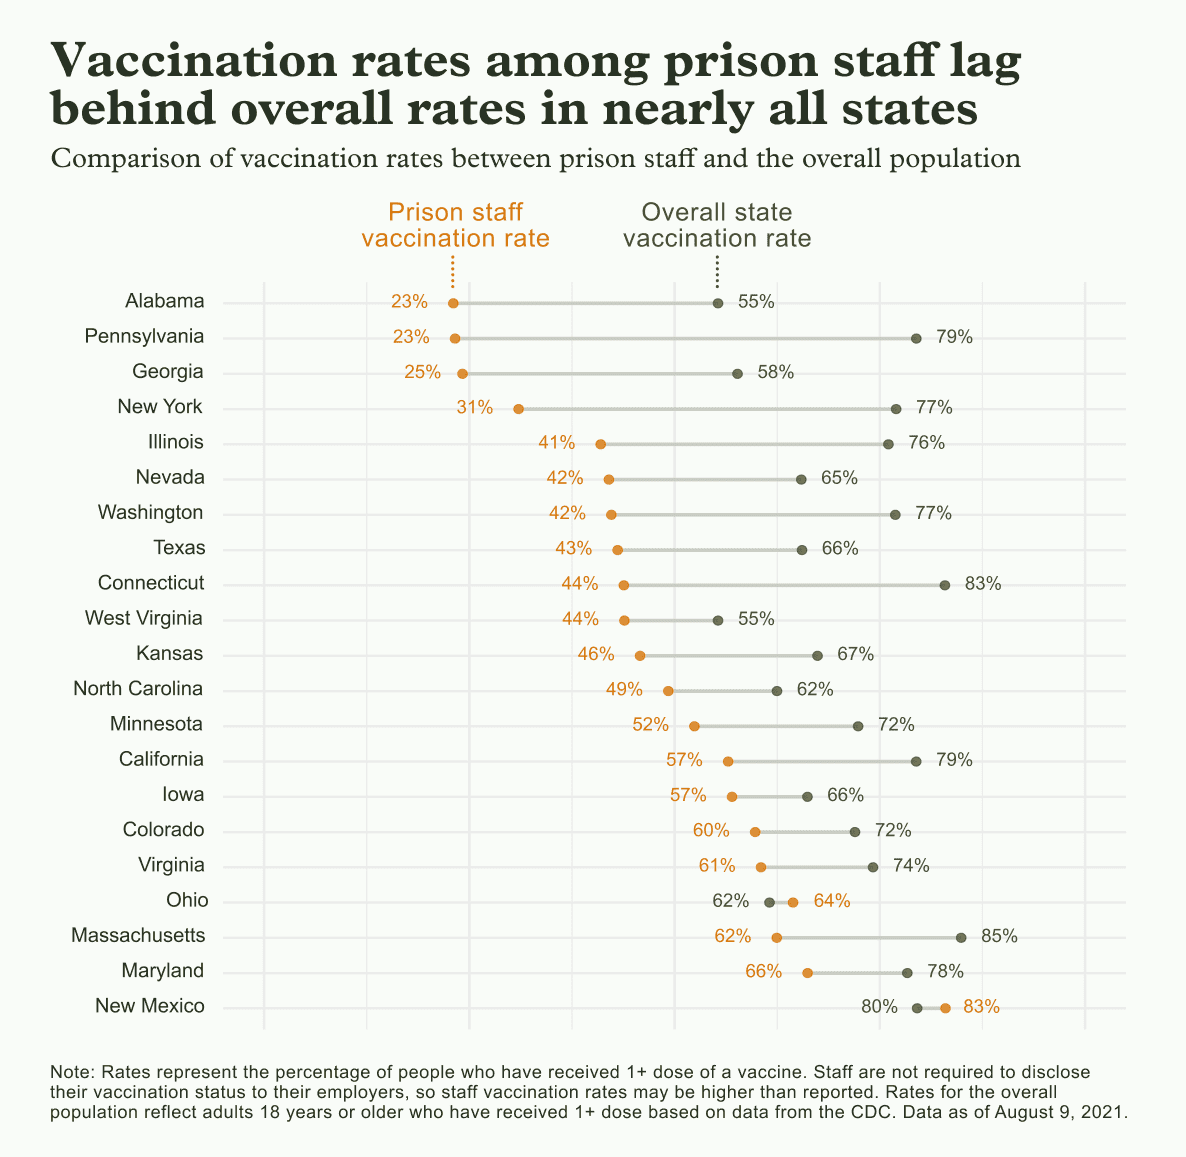 Graph showing vaccination rates among prison staff lagging behind overall rates in nearly all states